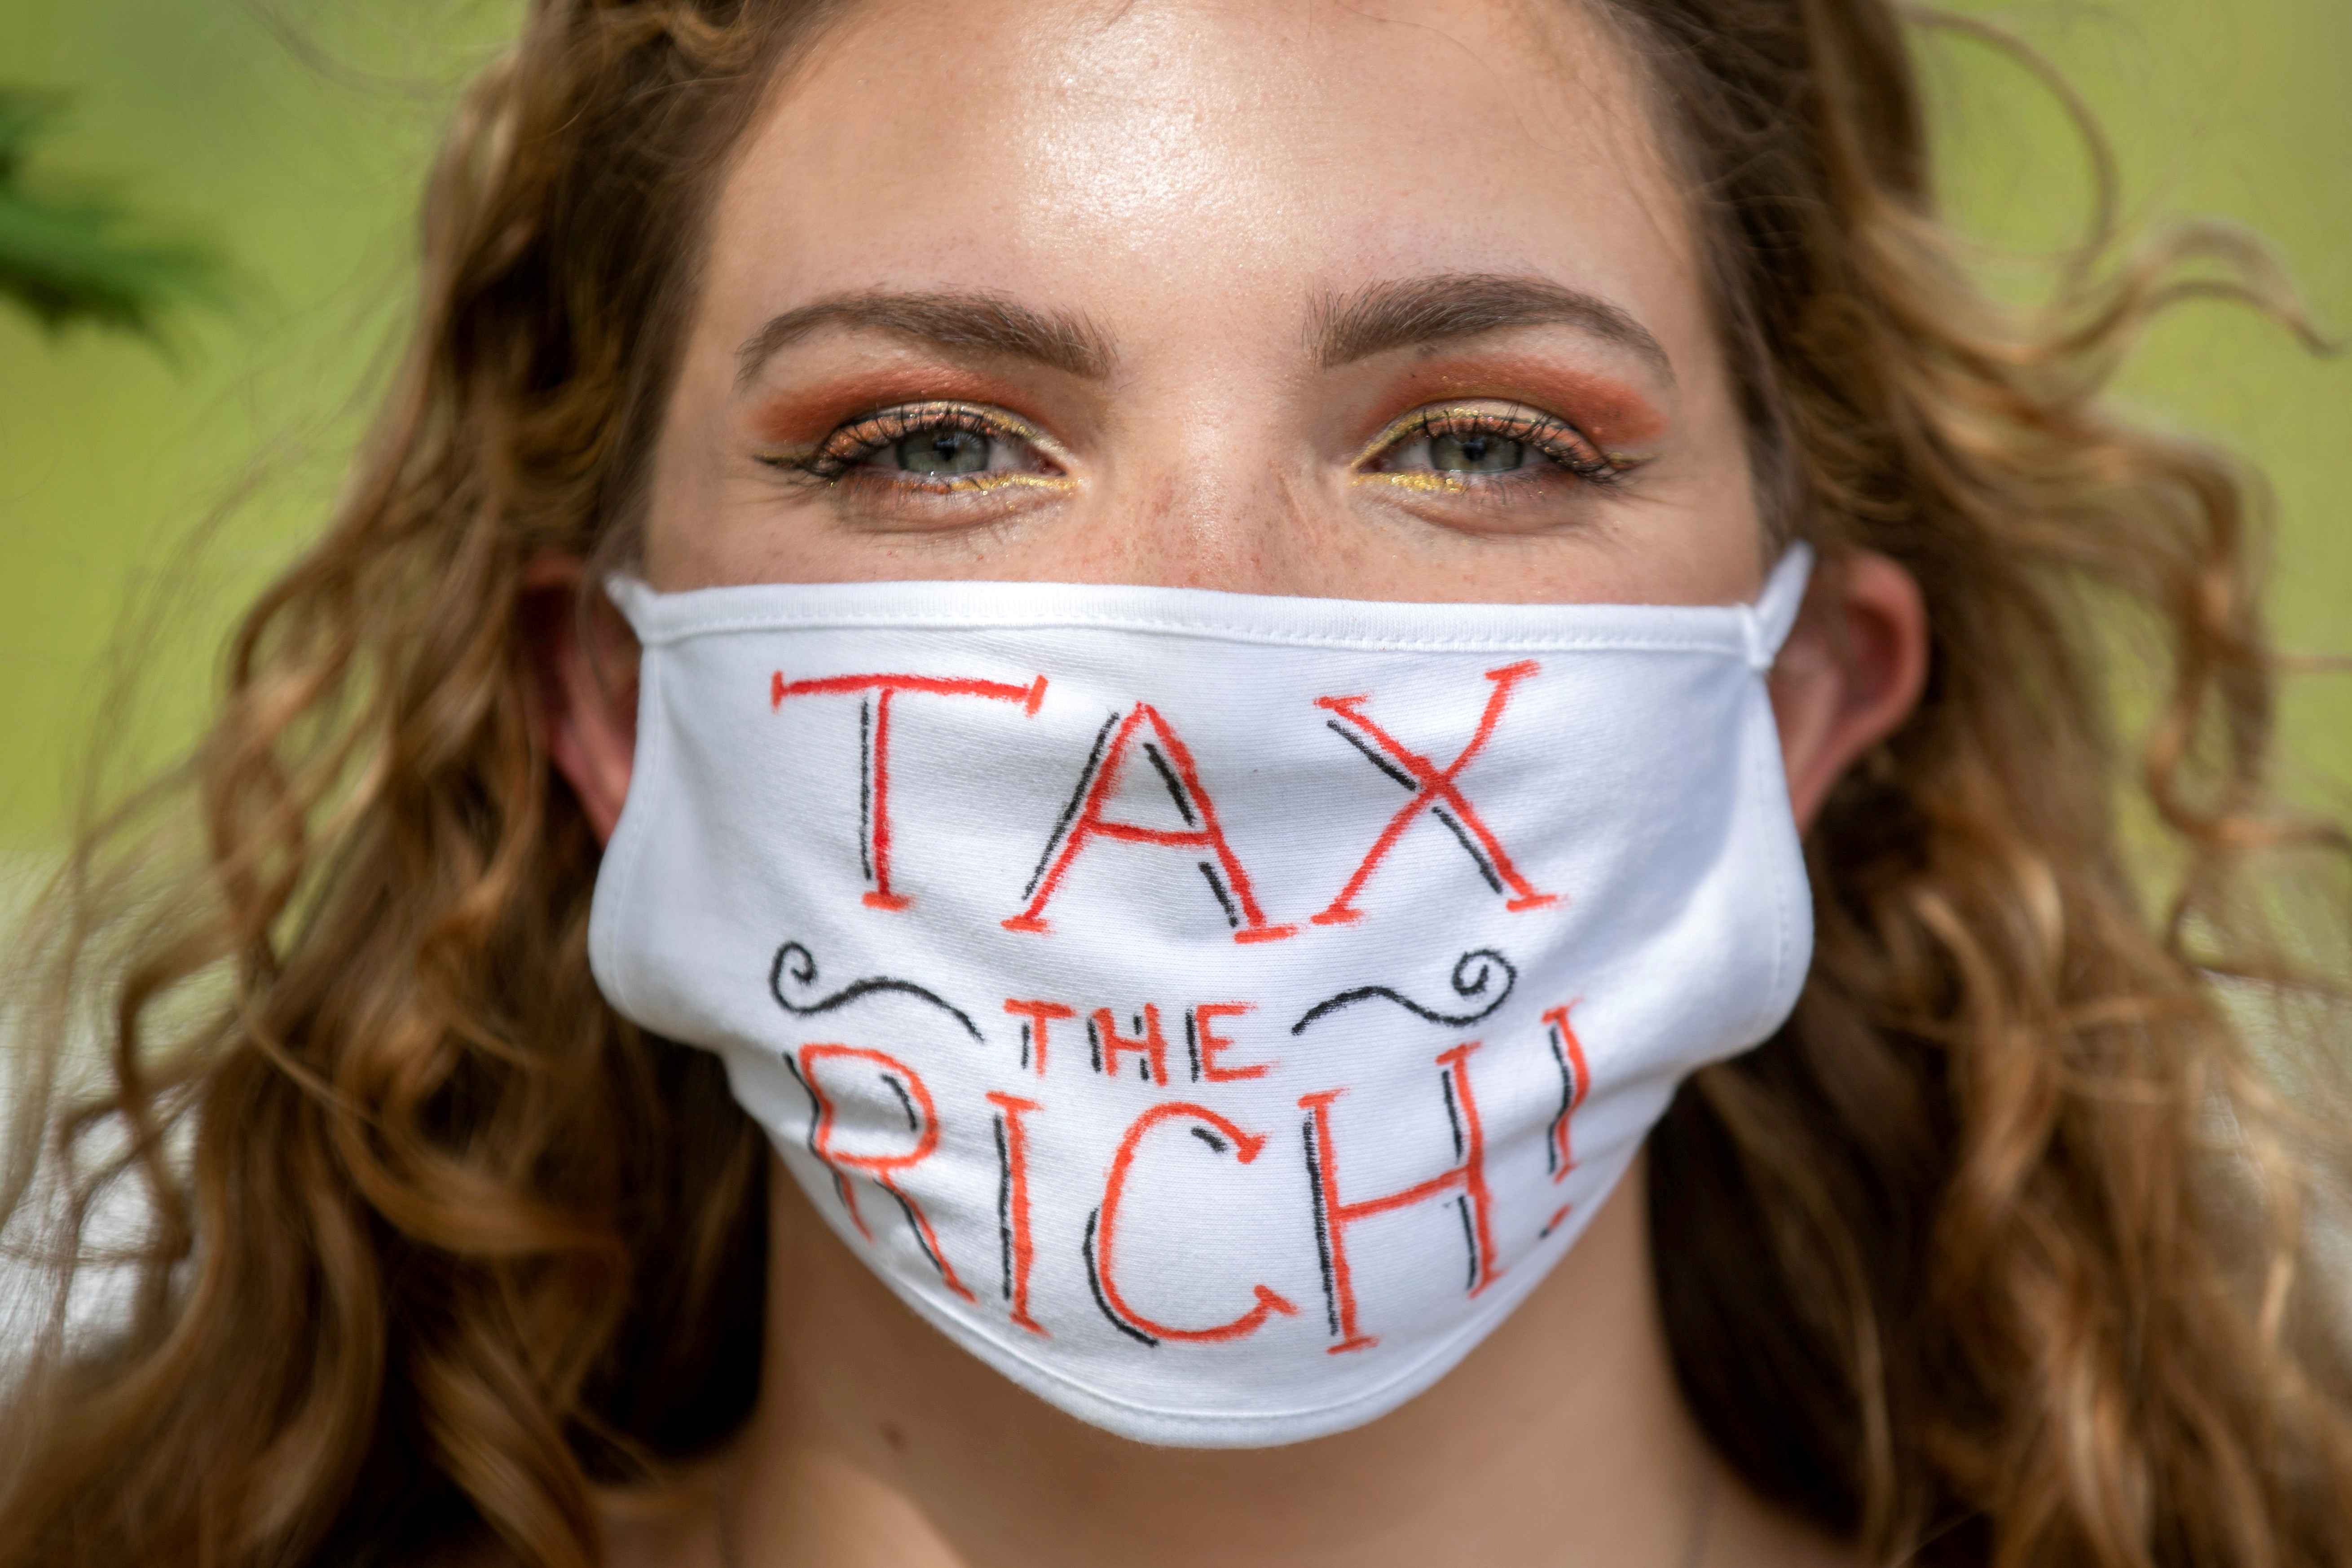 NDP supporter wears "Tax the Rich" mask